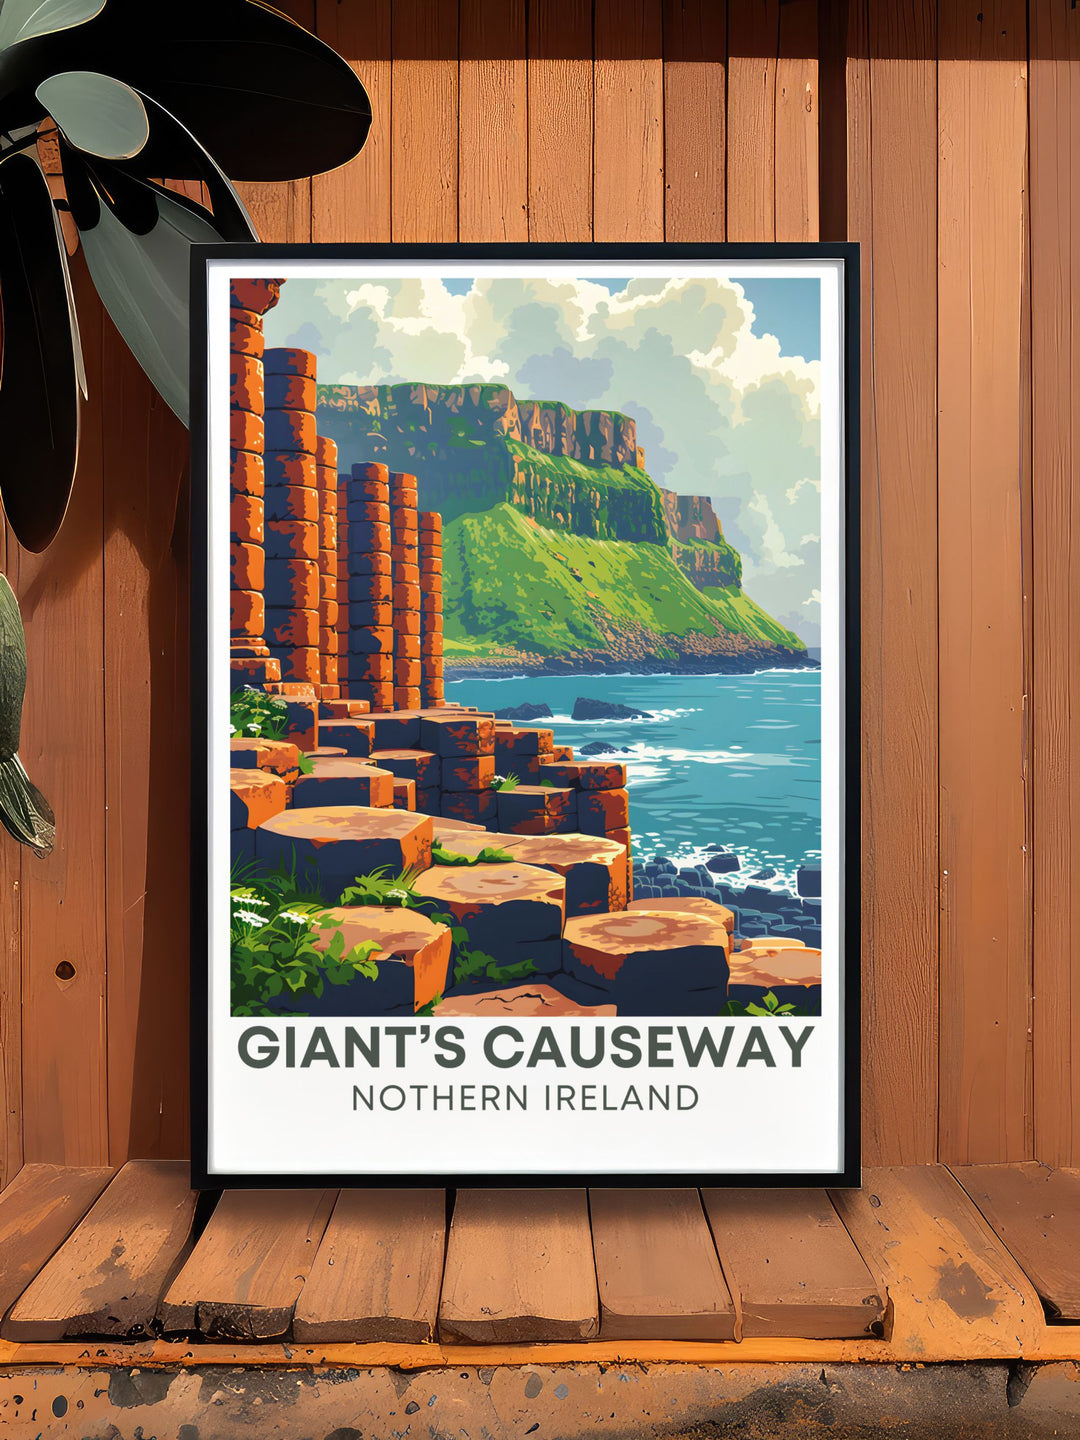 Canvas print of the Amphitheatre, capturing the dramatic cliff formations and stunning ocean views of Northern Irelands coastline, perfect for adding a touch of natural beauty and scenic wonder to any space.